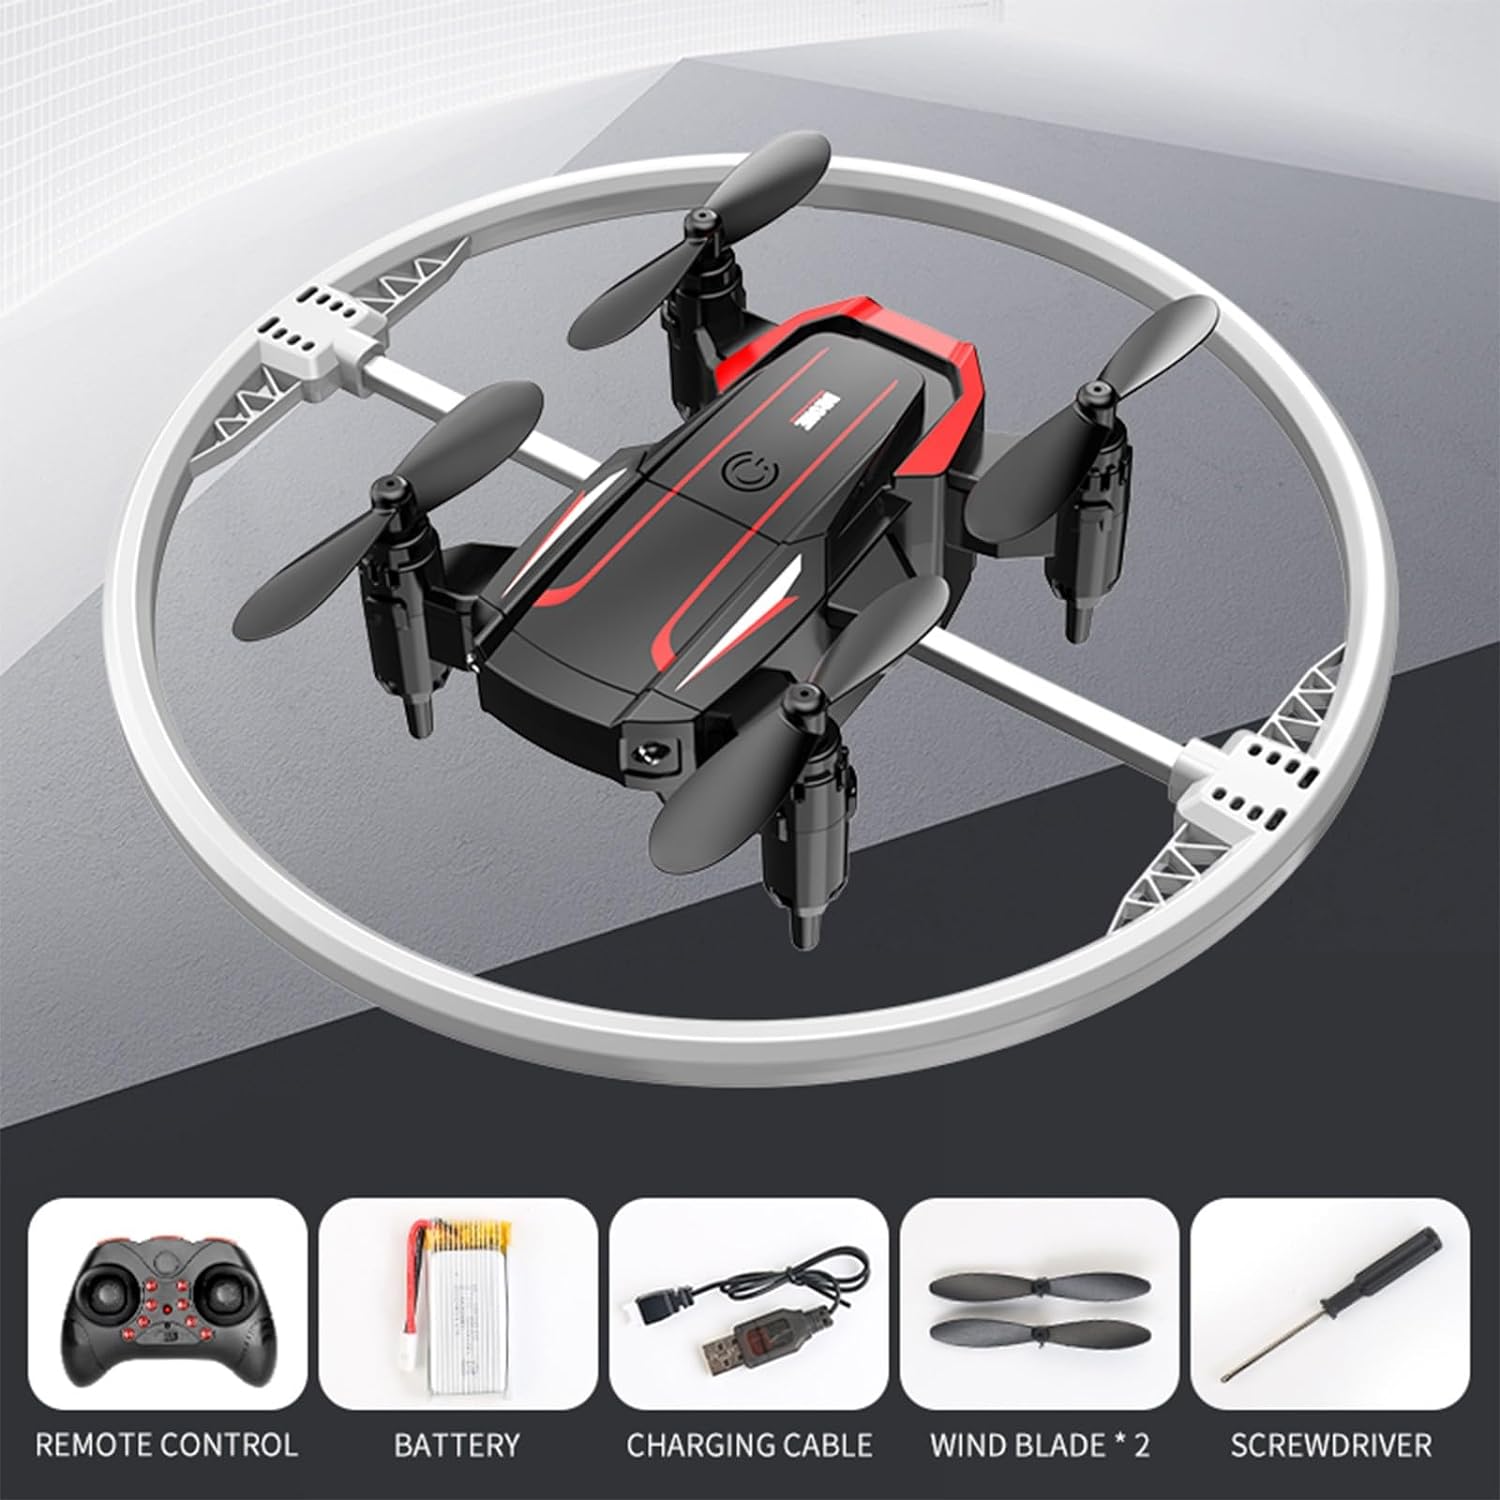 Mini Drones for Kids, Stunt Drone with Dazzling Lights, Small Remote Control Drone with Altitude Control, Rolling and Rotating